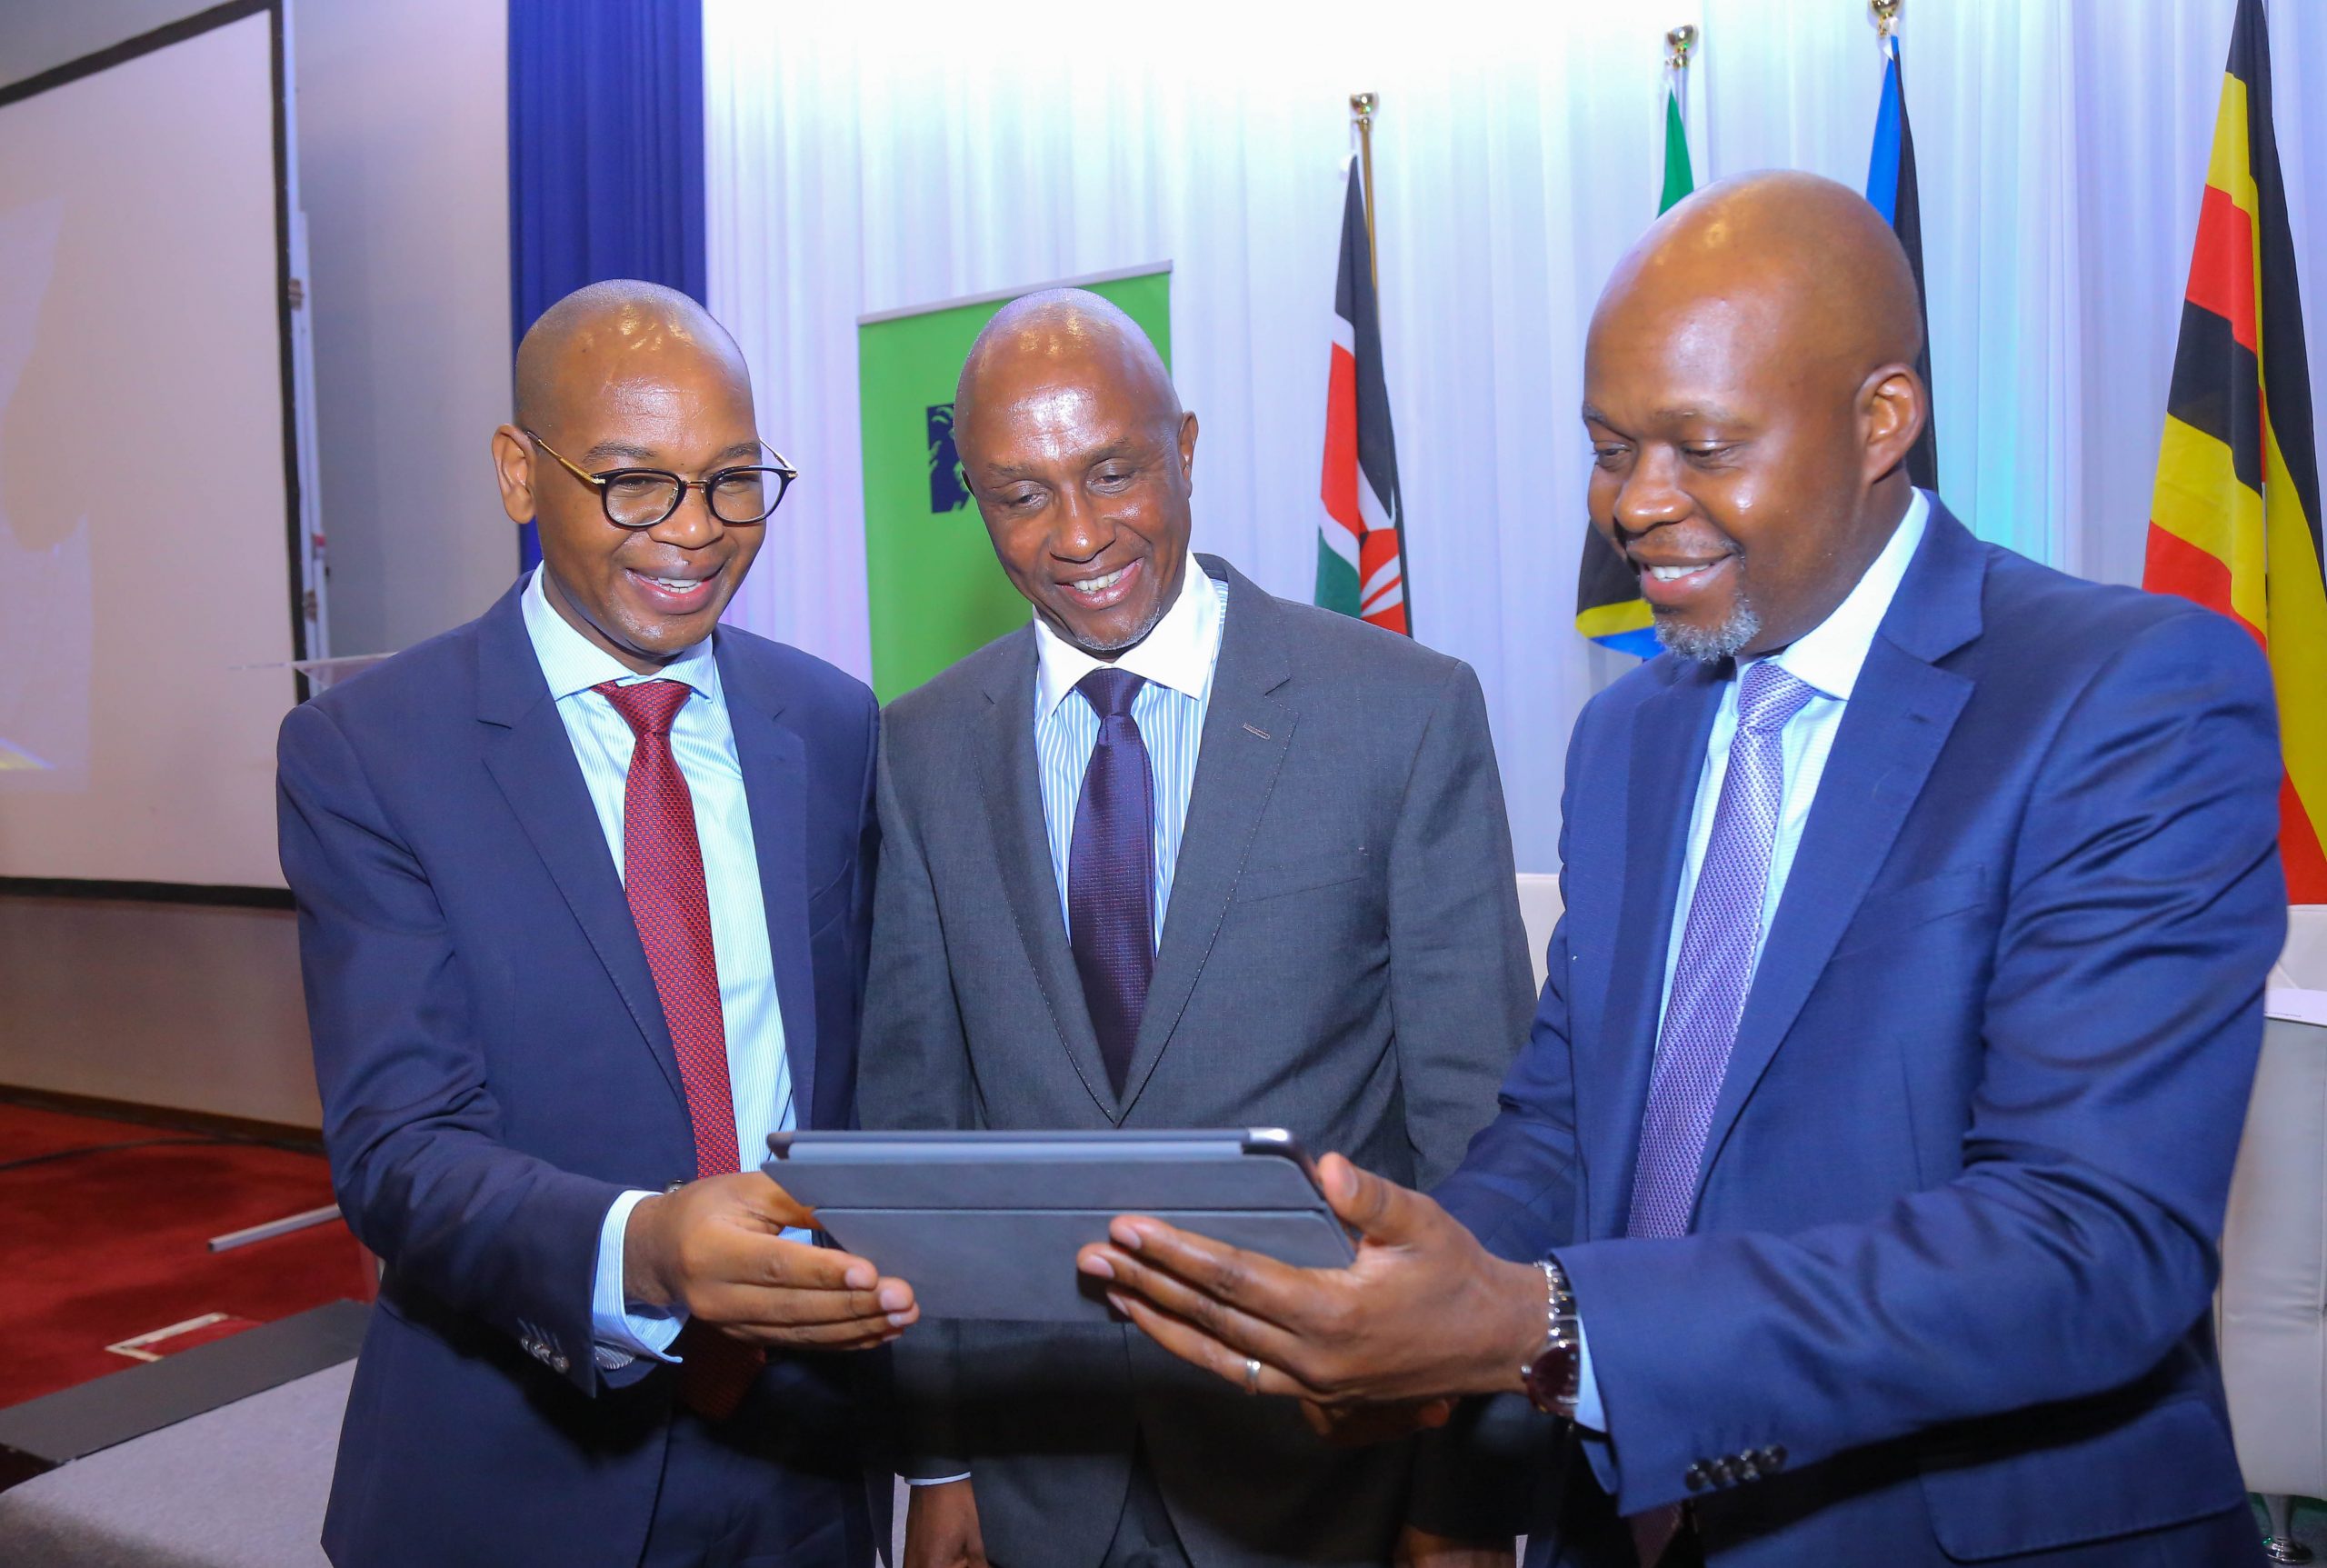 KCB Group CEO & MD, Joshua Oigara (left), with, KCB Group Chairman, Andrew Wambari Kairu (centre) and KCB Group Chief Finance Officer, Lawrence Kimathi, during the 2019 Full Year Financial results announcements held at Radisson Blu hotel. www.businesstoday.co.ke